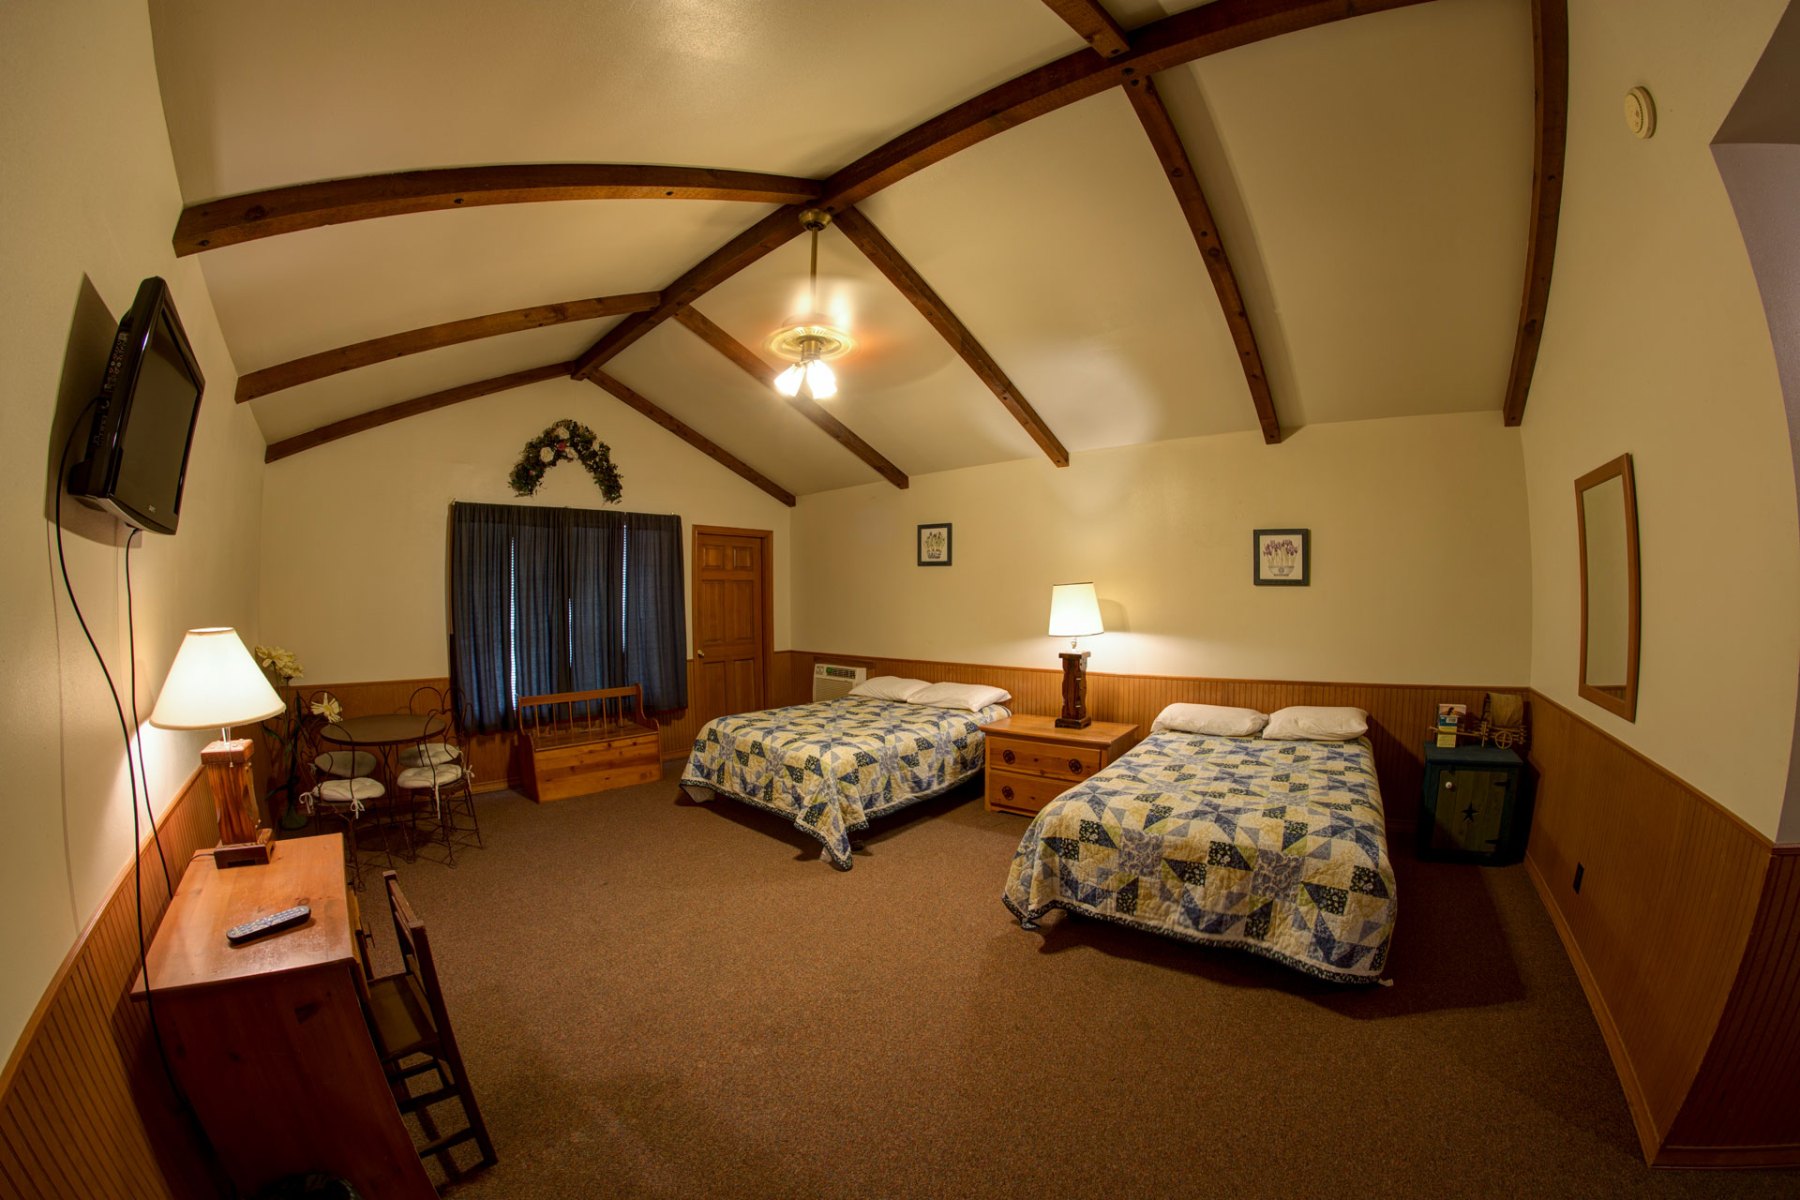 Double bed room with vaulted ceiling